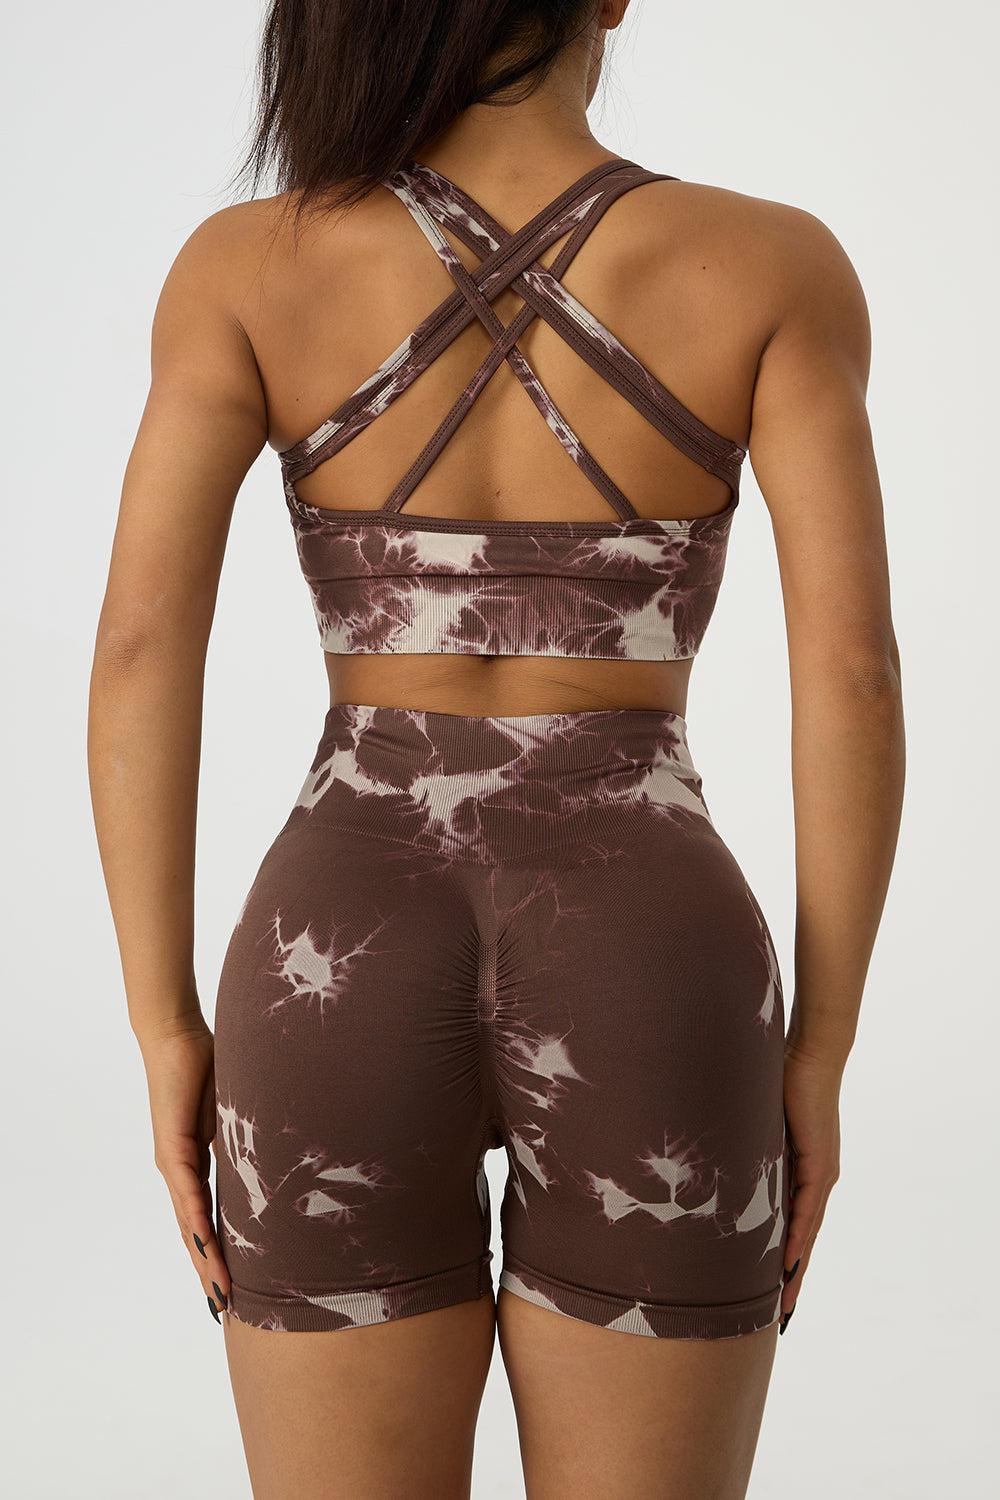 the back of a woman wearing a brown and white tie dye sports bra